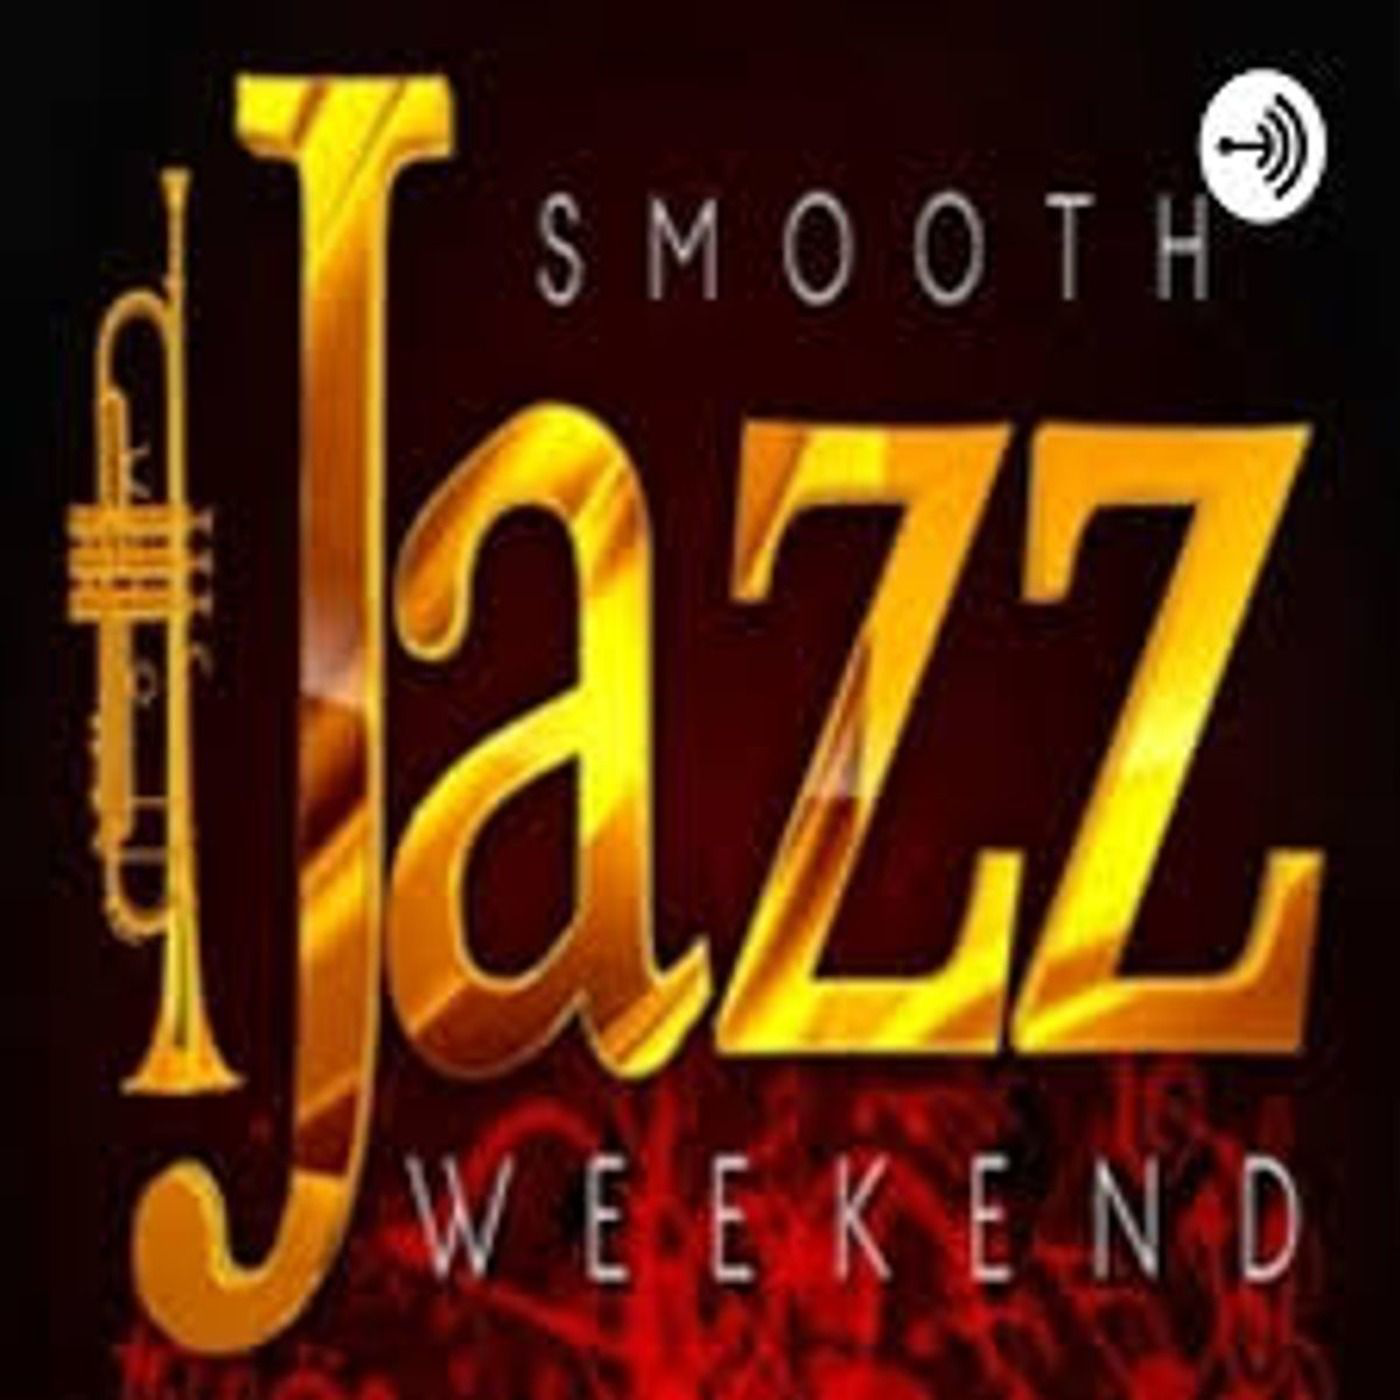 A highlight from  Smooth Jazz Weekend with Tina E. (Keys To Paradise)